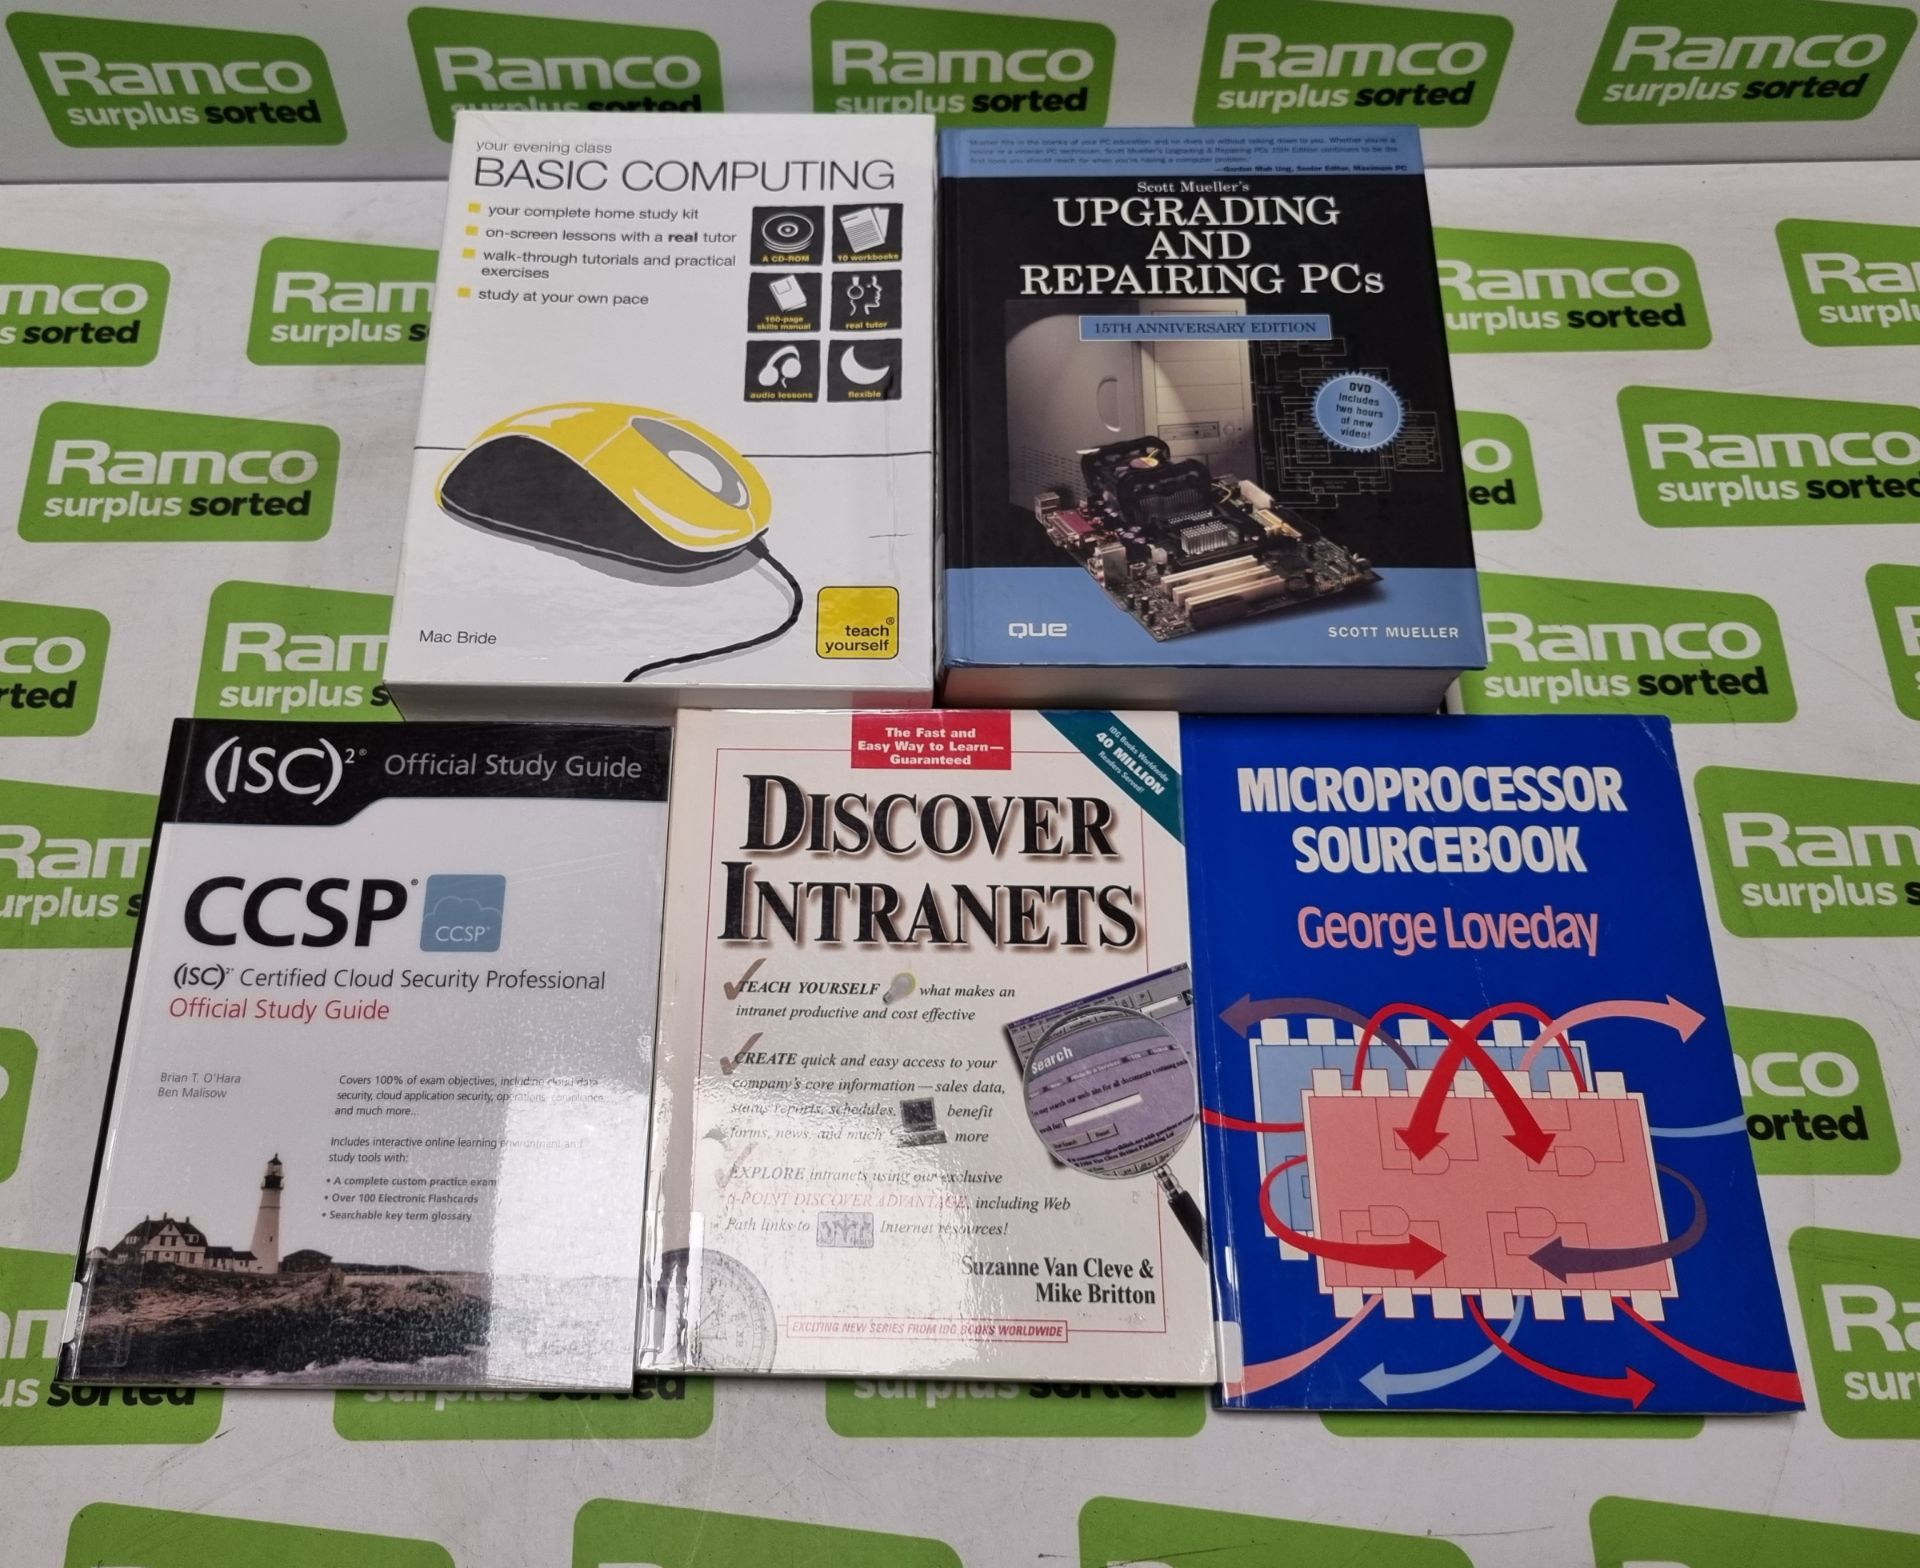 Your evening class: Basic Computing, Microprocessor Sourcebook, Scott Mueller's Upgrading and Repair - Image 2 of 11